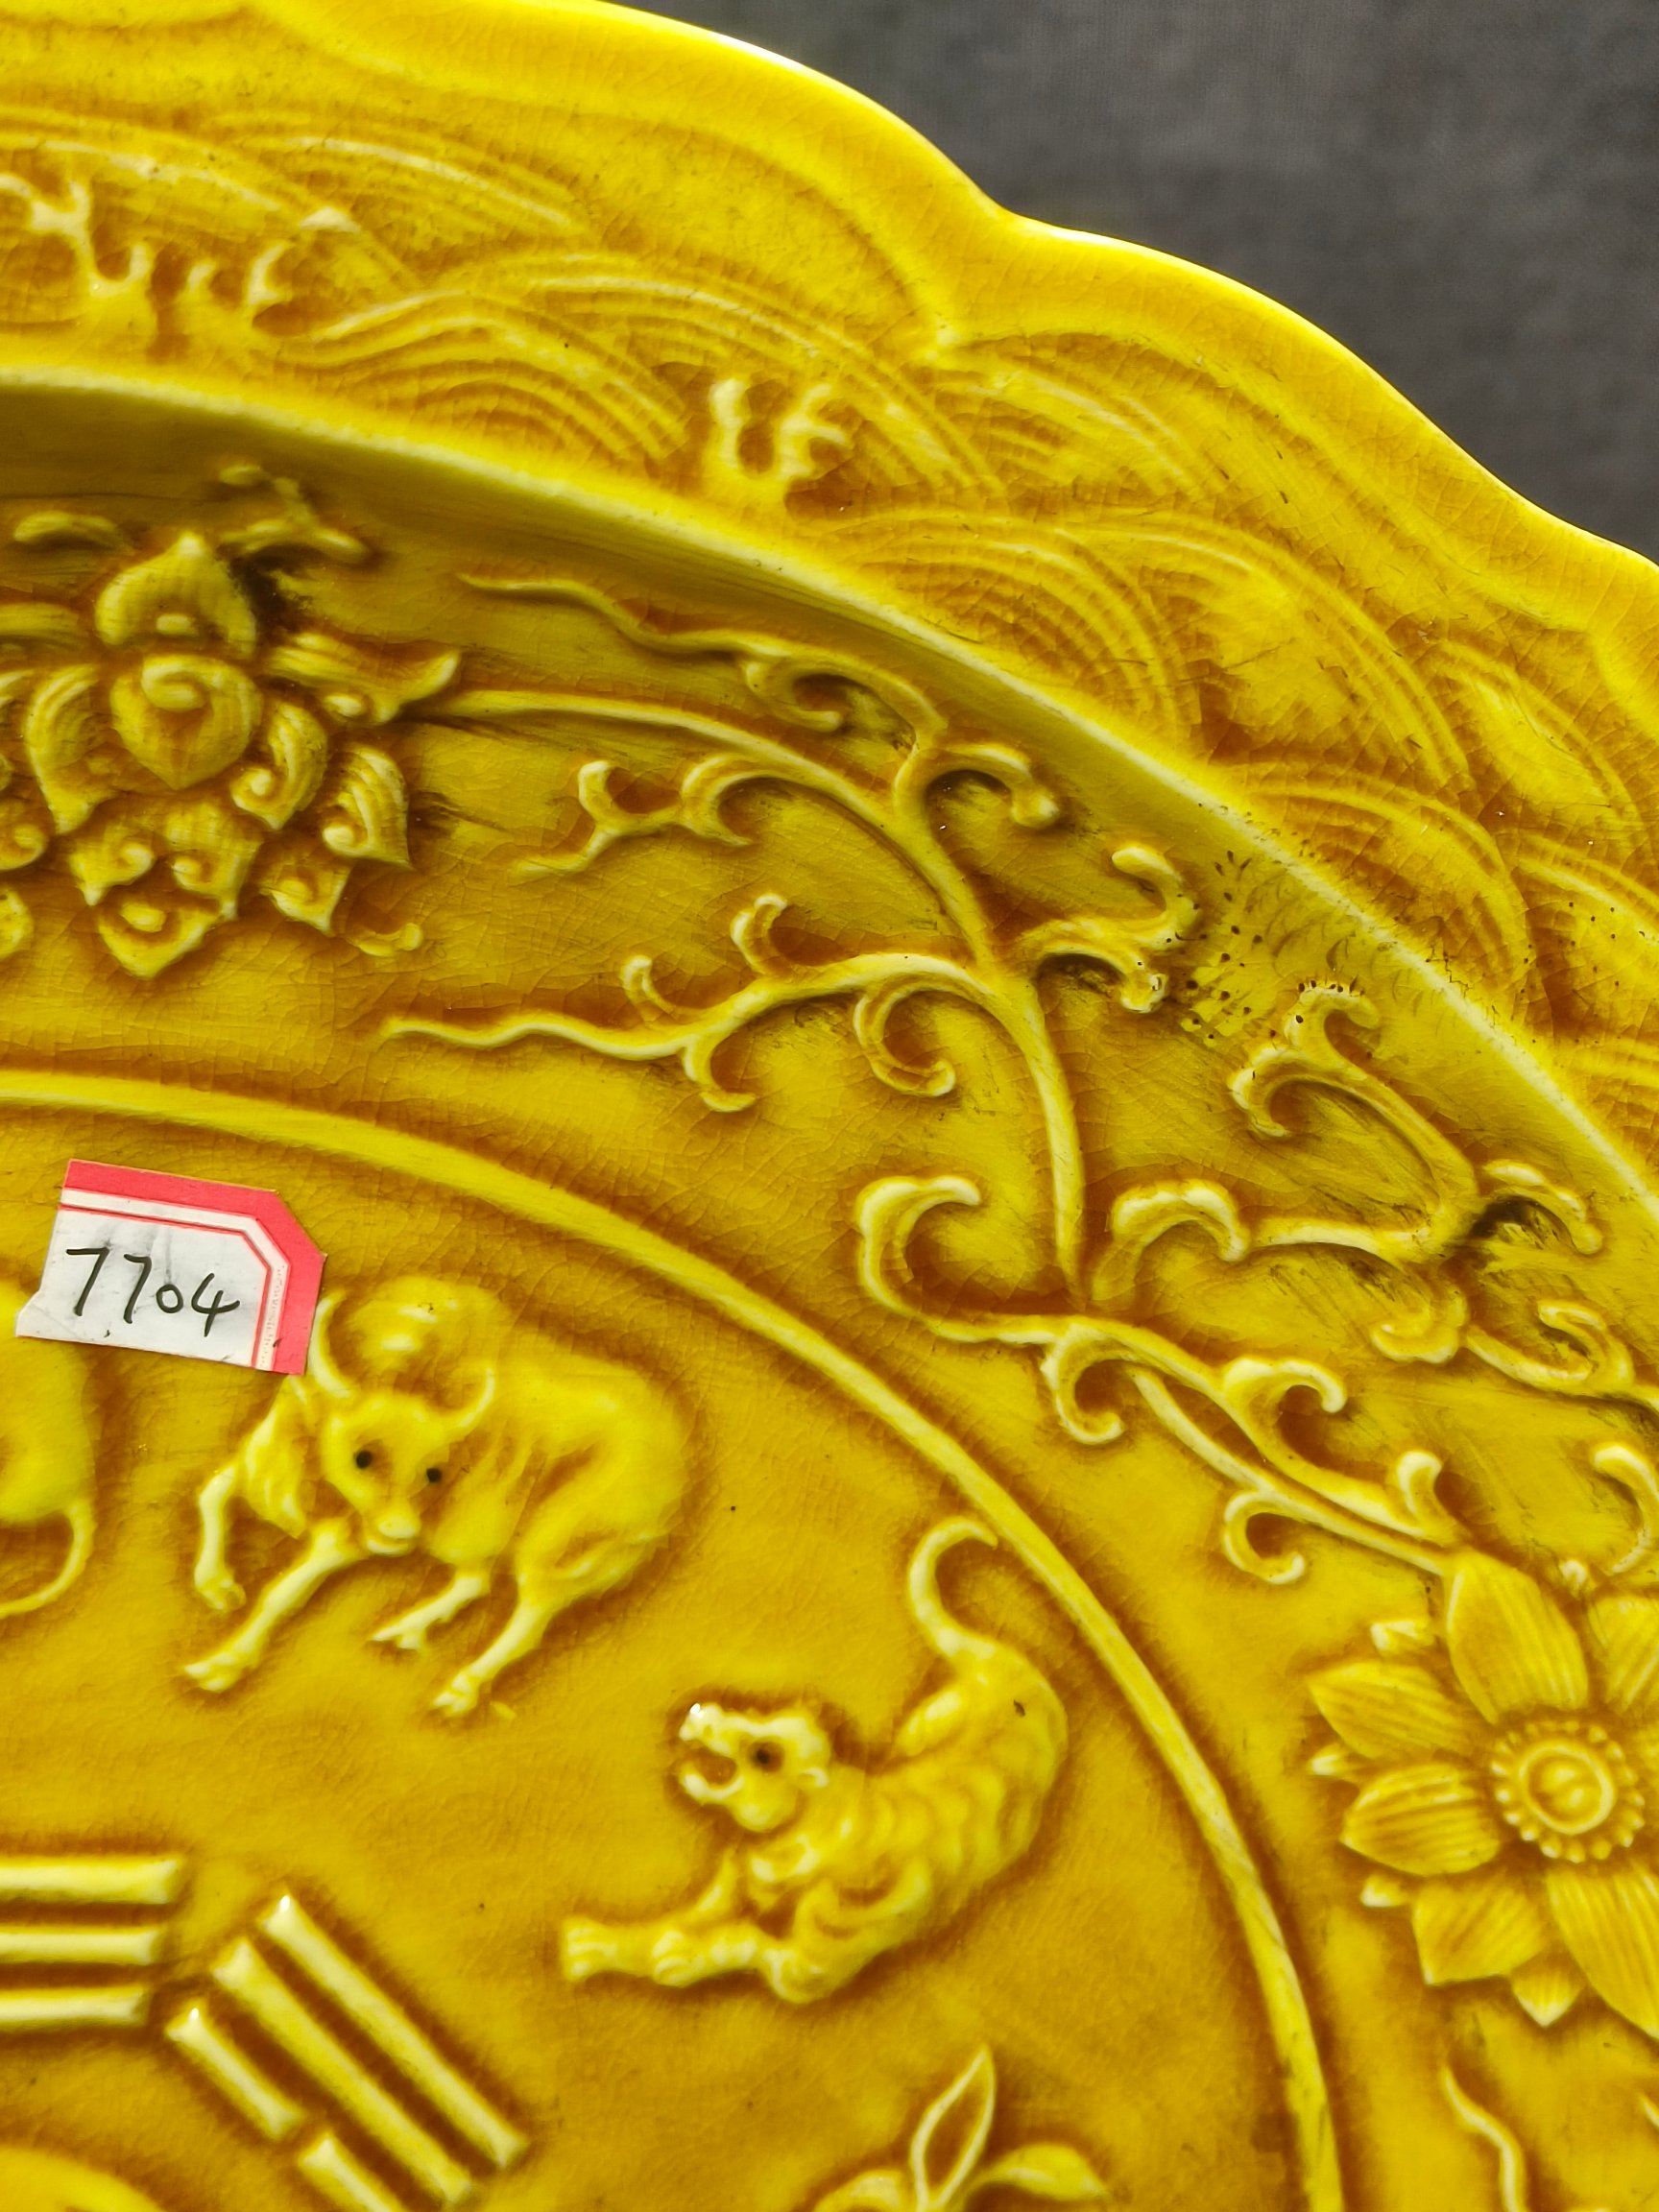 Imperial yellow-glazed porcelain plate with carved [Twelve Zodiac, Bagua] patterns made in the Hongz - Image 5 of 8